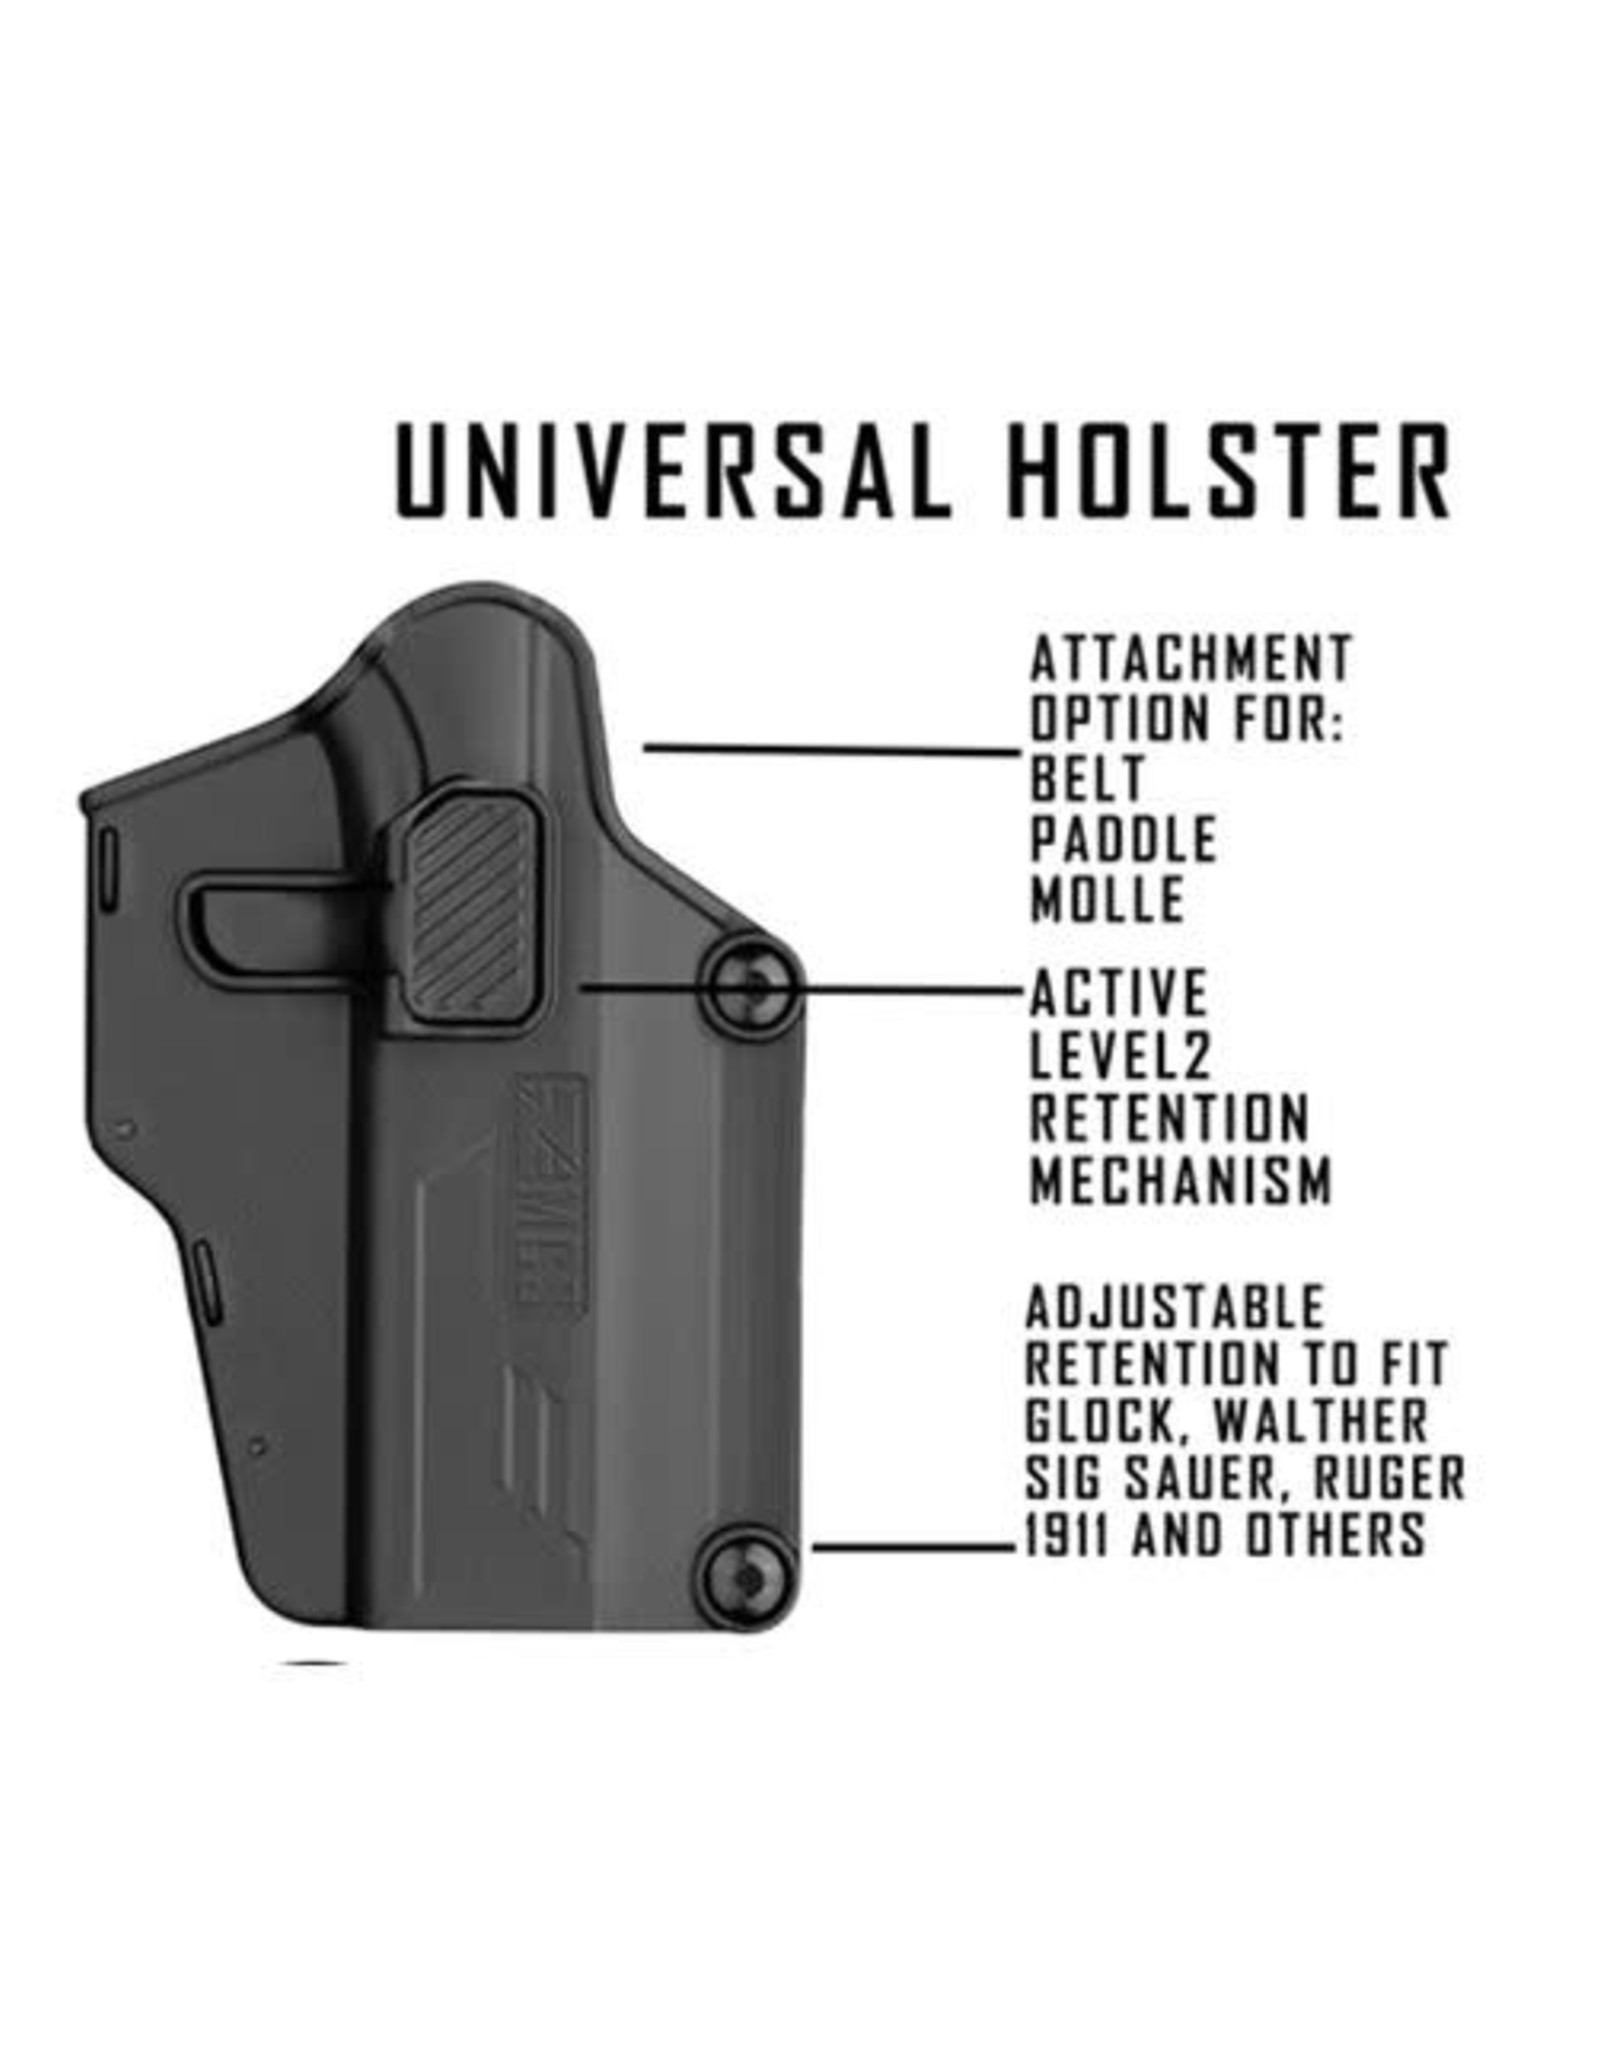 Universal Polymer Belt Clip for Holsters Magazine Pouches and Attachme